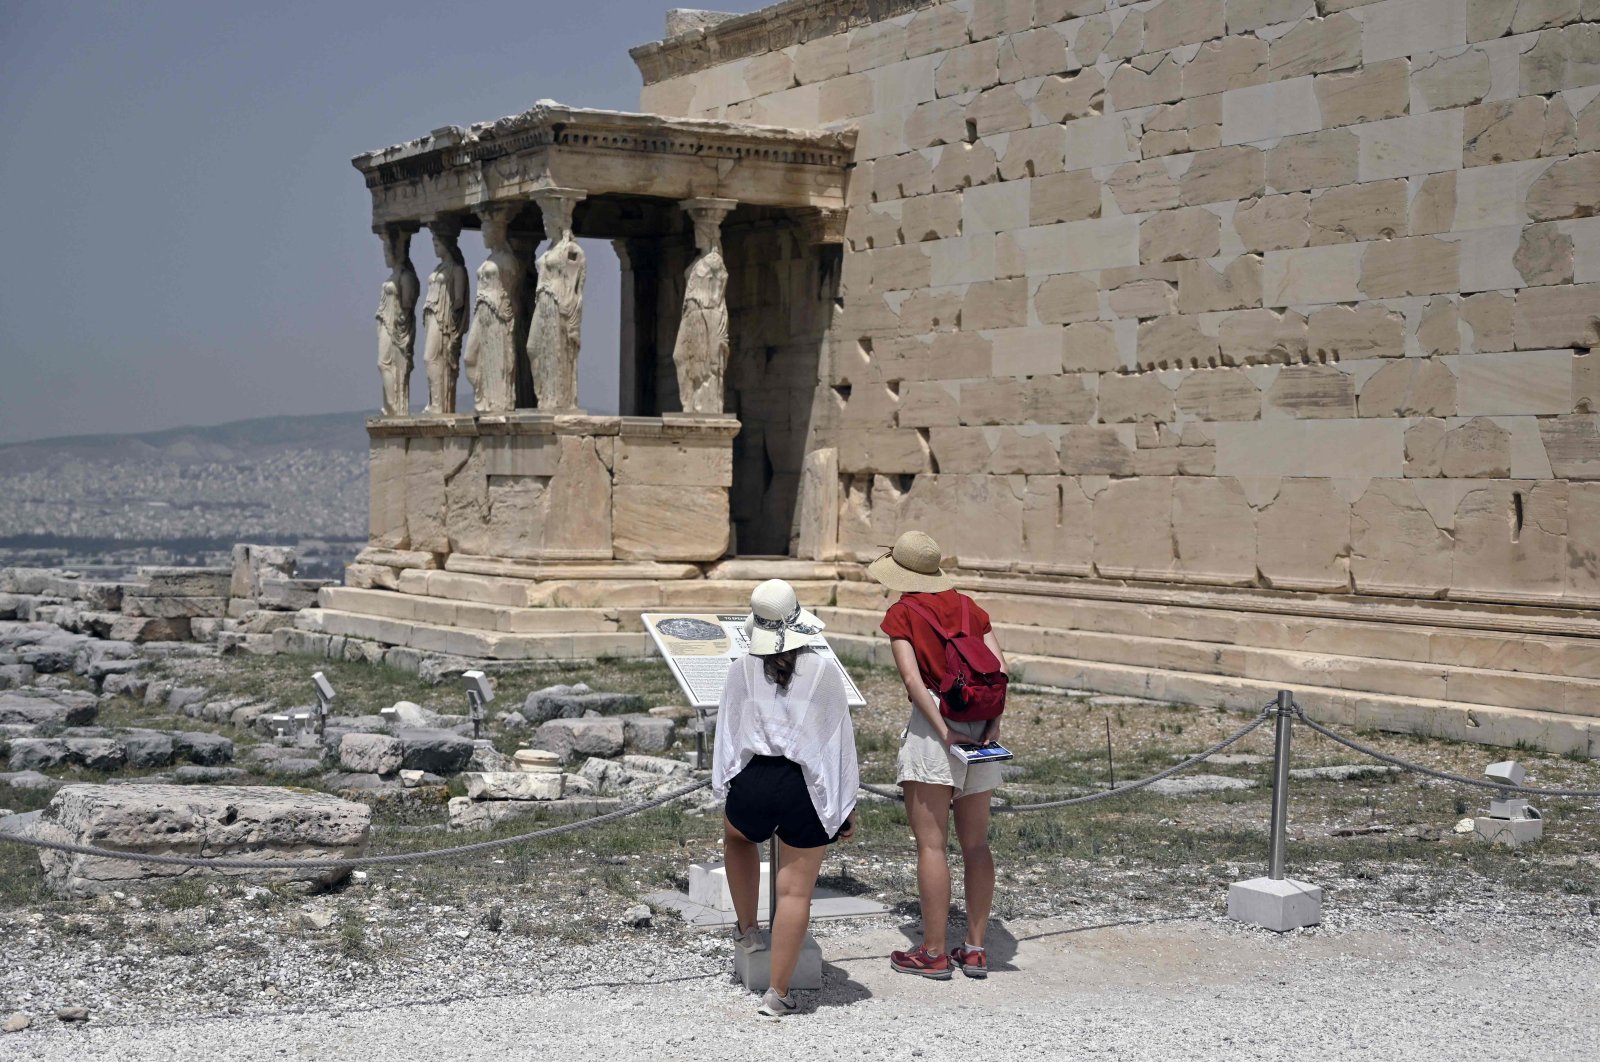 Tourists visit the Ancient Acropolis archeological site in Athens, Greece, July 1, 2021. (AFP Photo)